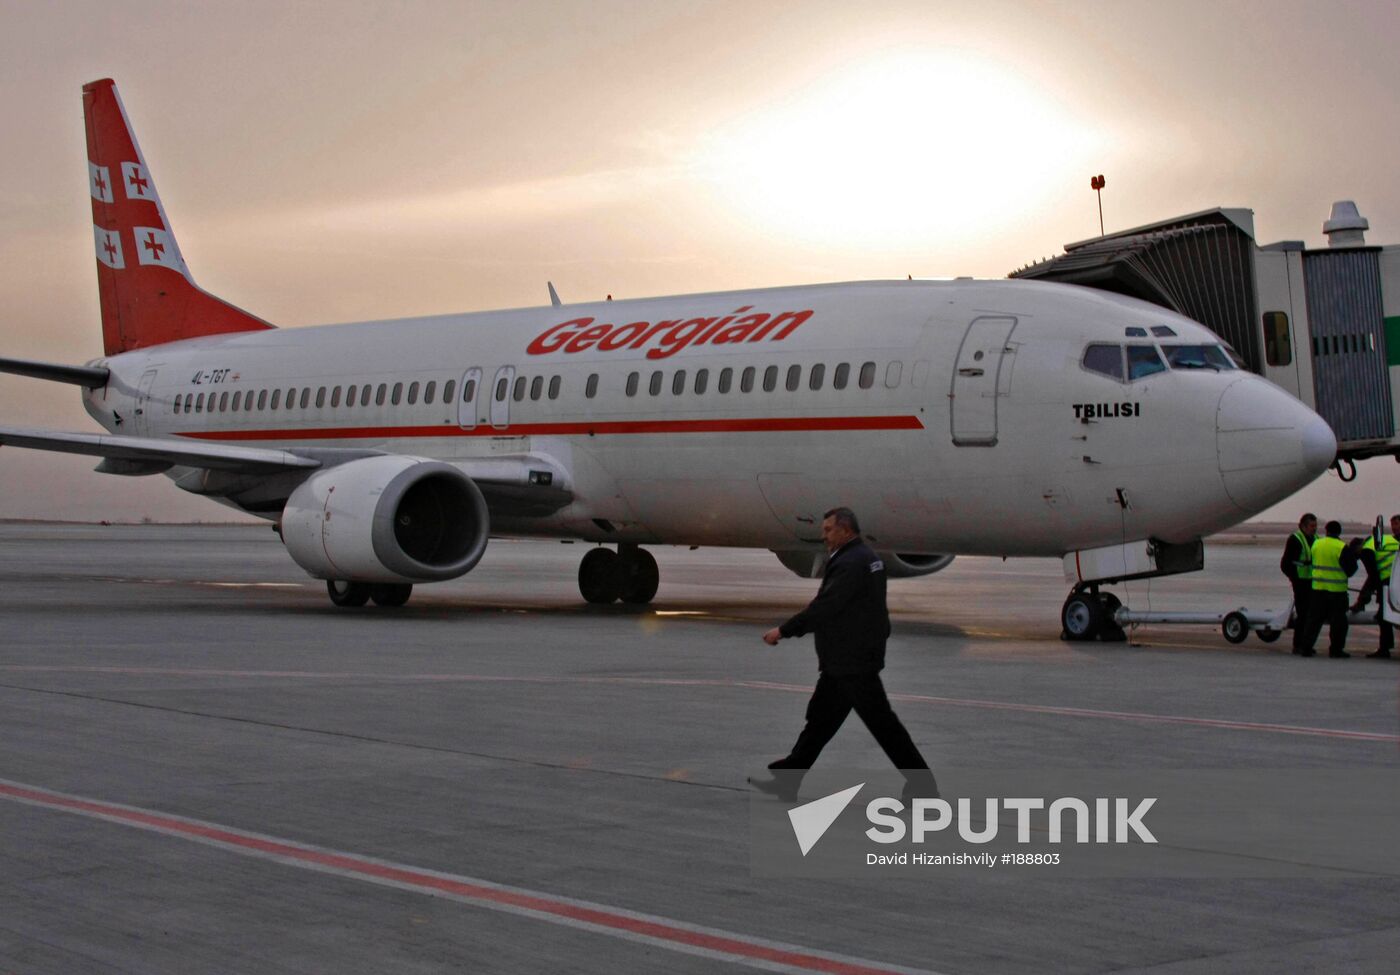 Resumption of air service between Russia and Georgia